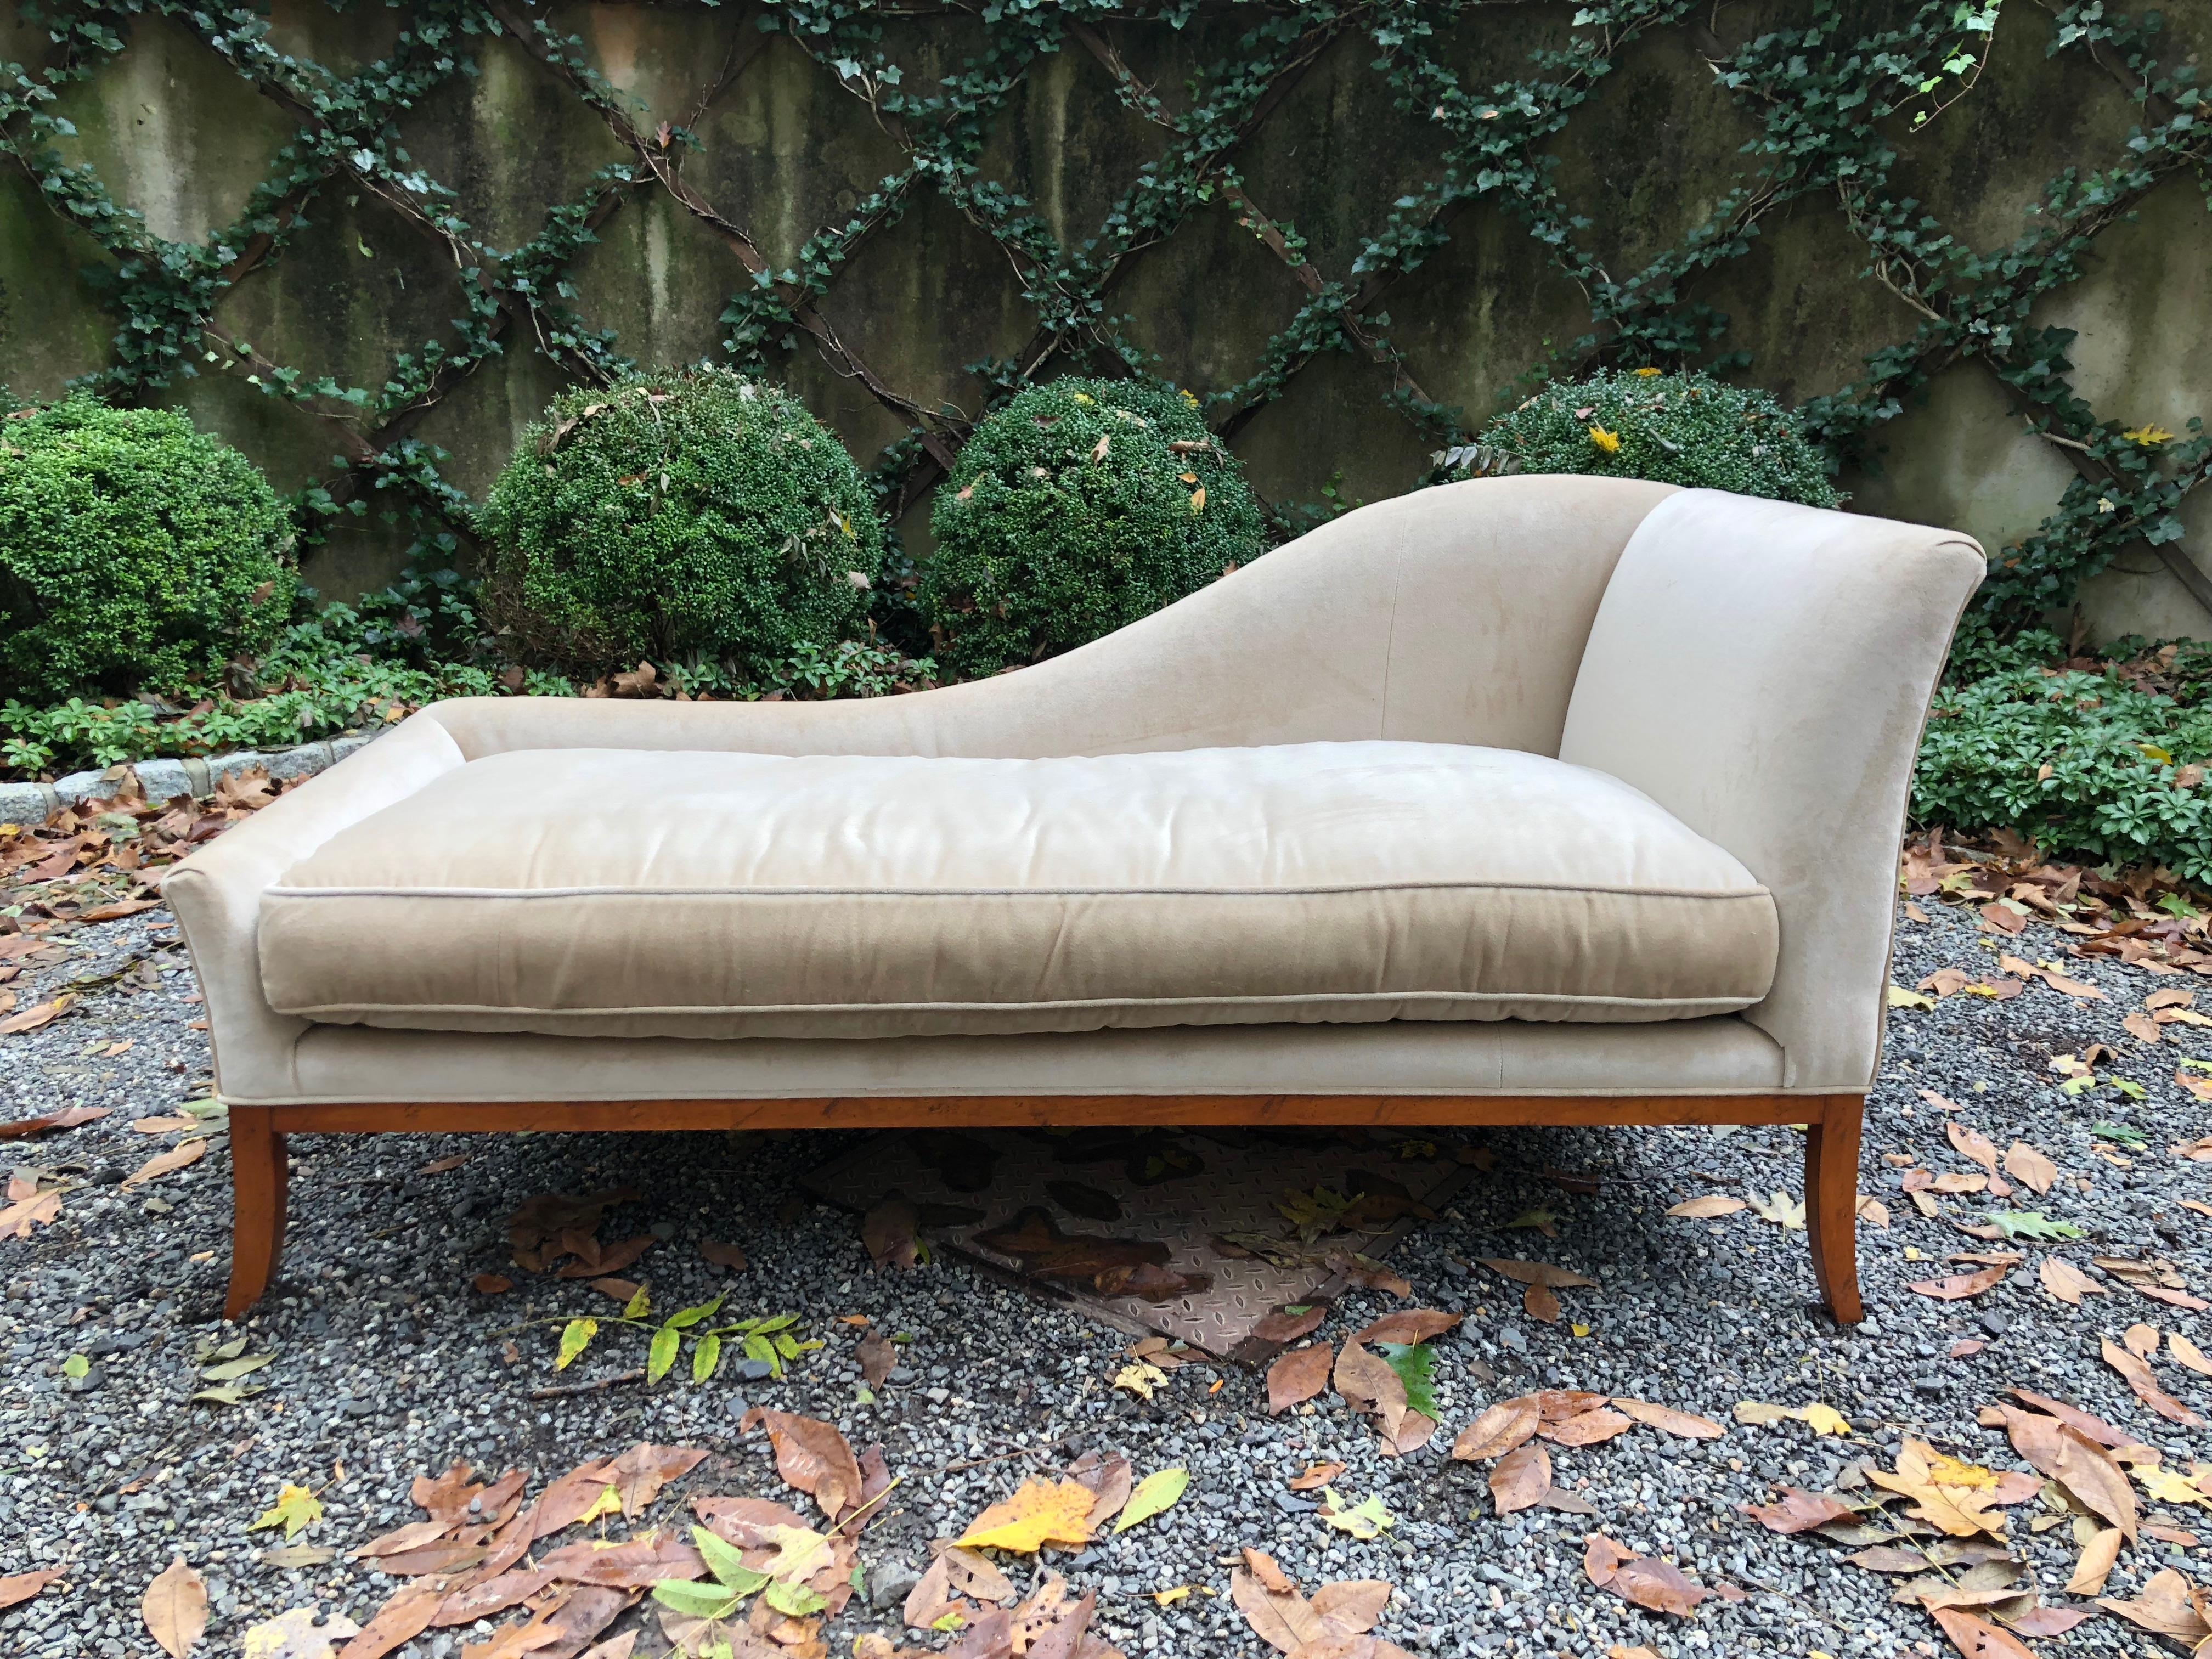 Sophisticated champagne velvet chaise lounge by Lee Jofa, having a delicate sloping arm and slightly splayed legs. The wooden frame has a beautiful pecan wood finish. Loose cushion is down filled. 

Seat arm heights are 21 (low end) and 35 (high